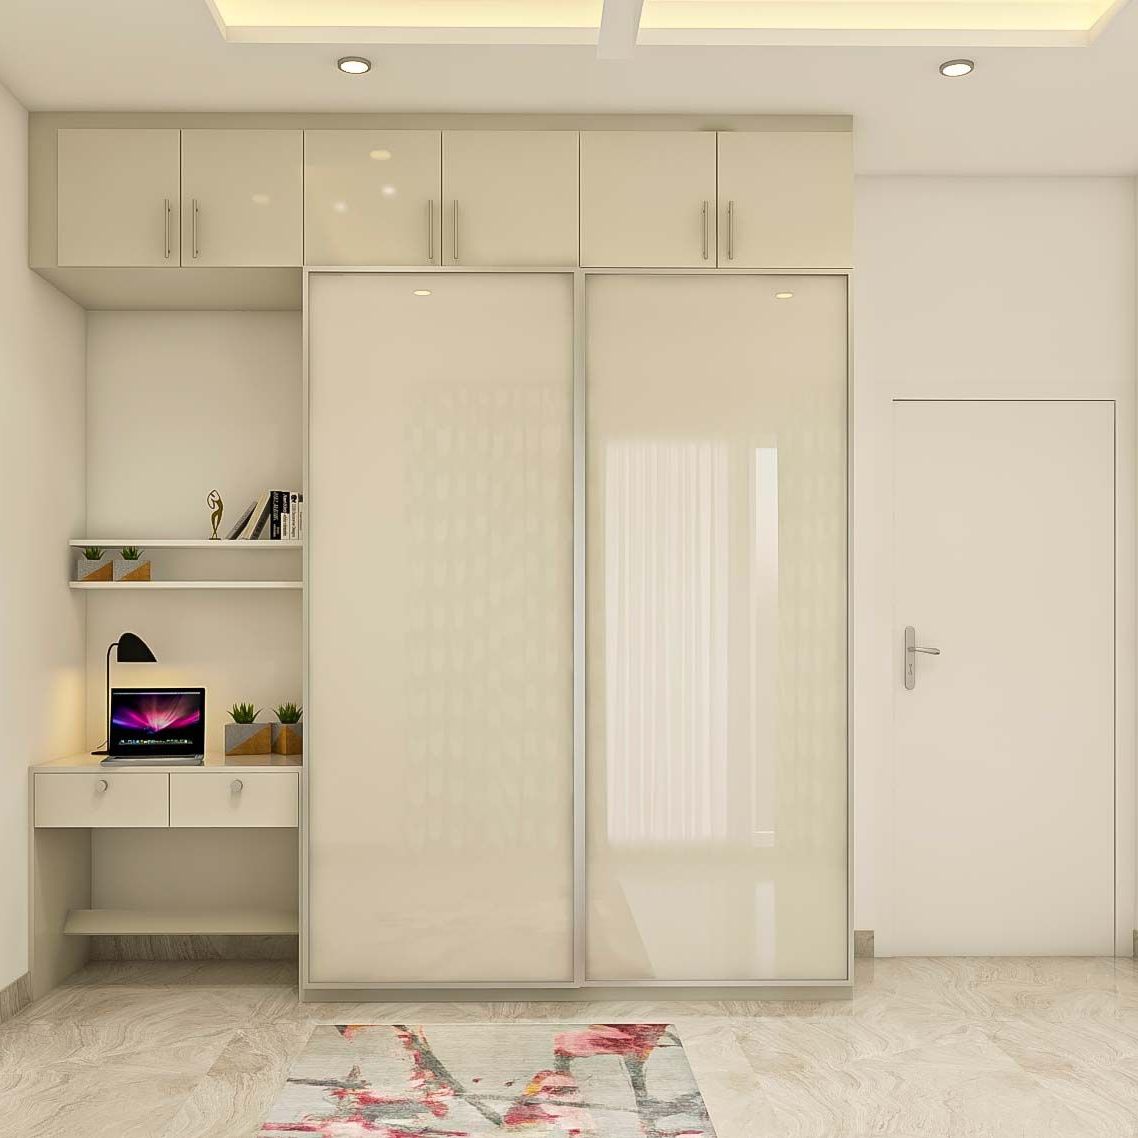 Contemporary Spacious Wardrobe With Glossy White Laminate | Livspace For Glossy Wardrobes (Gallery 5 of 20)